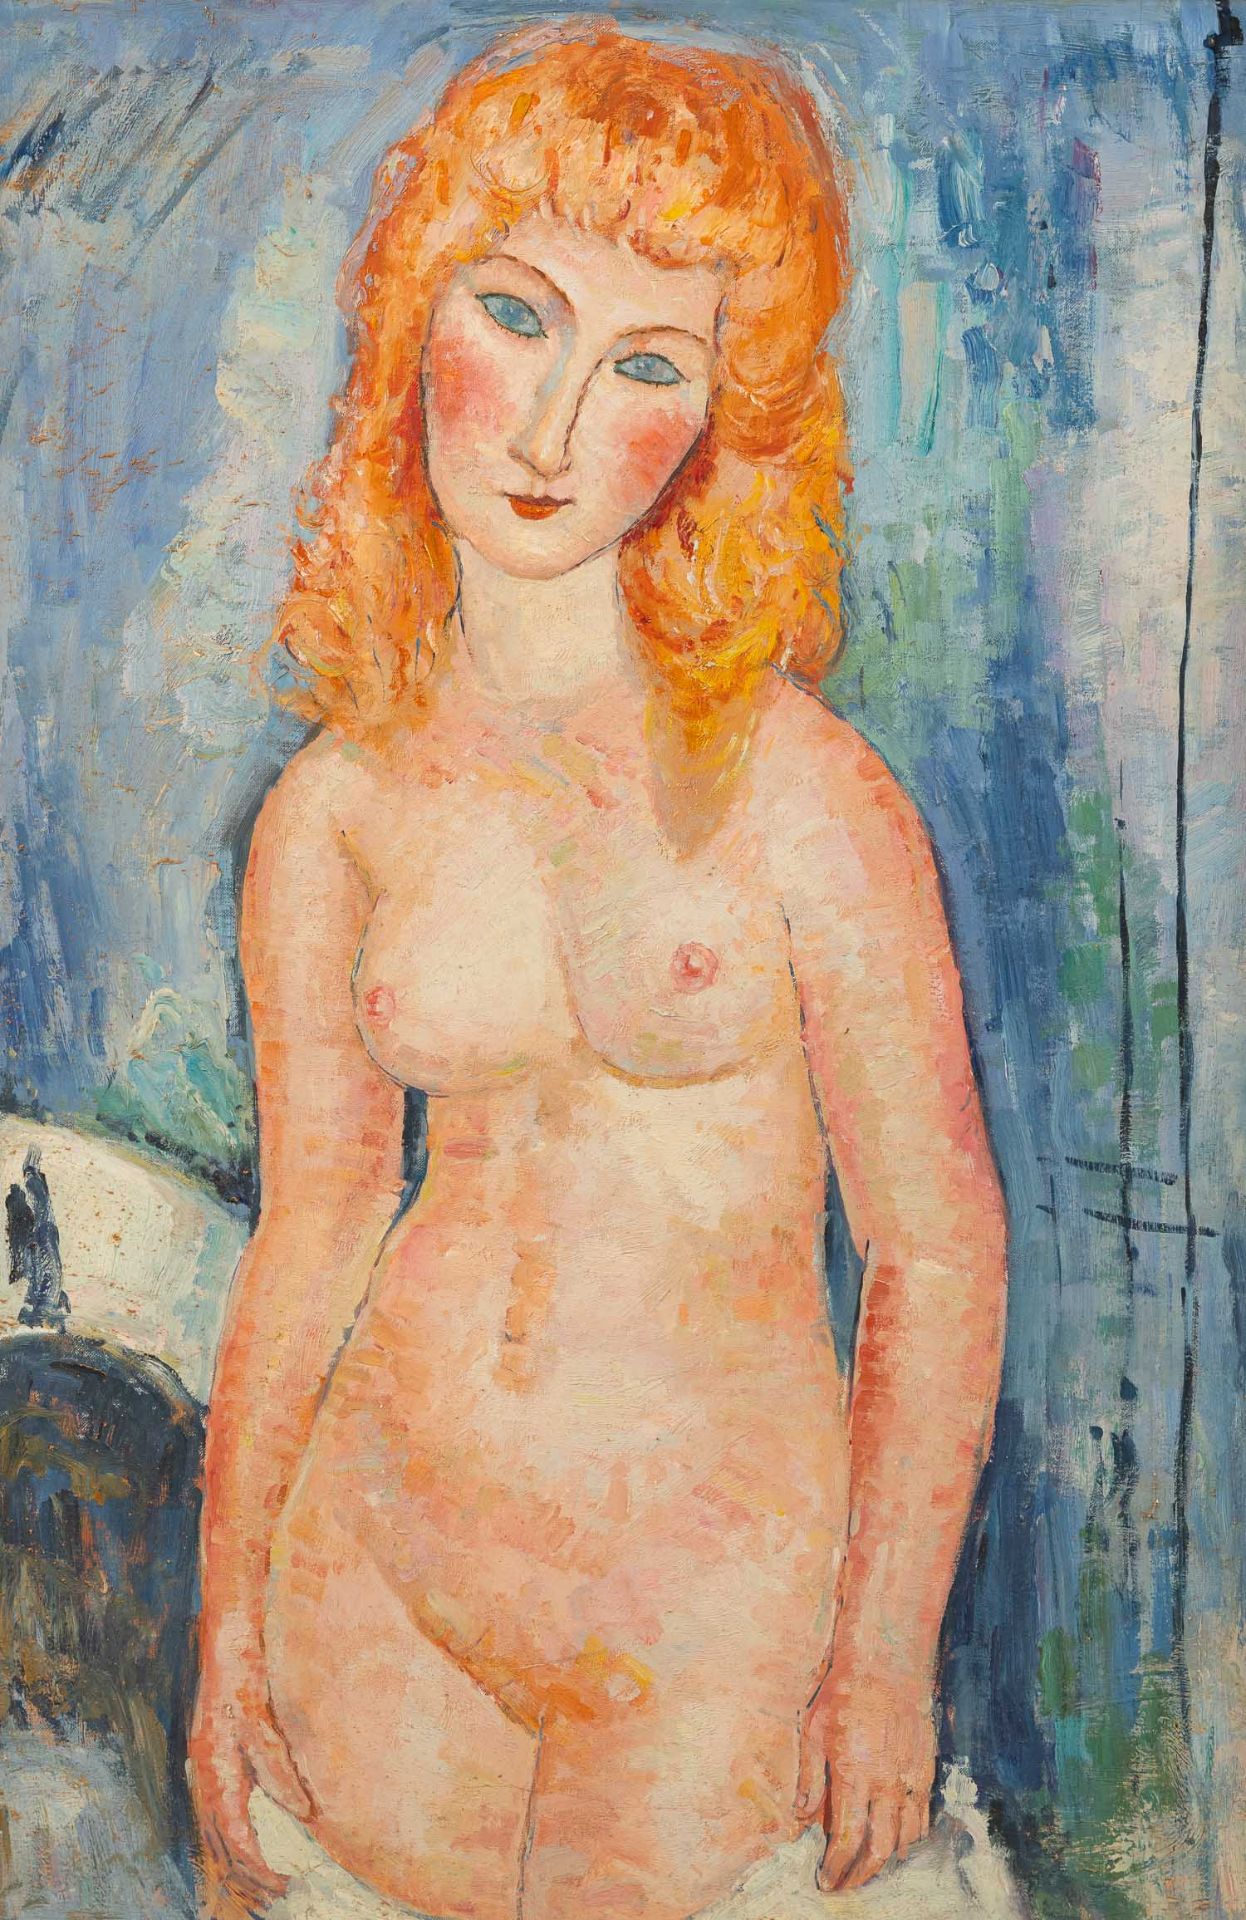 Amedeo Modigliani (1884-1920) – After - Image 2 of 3